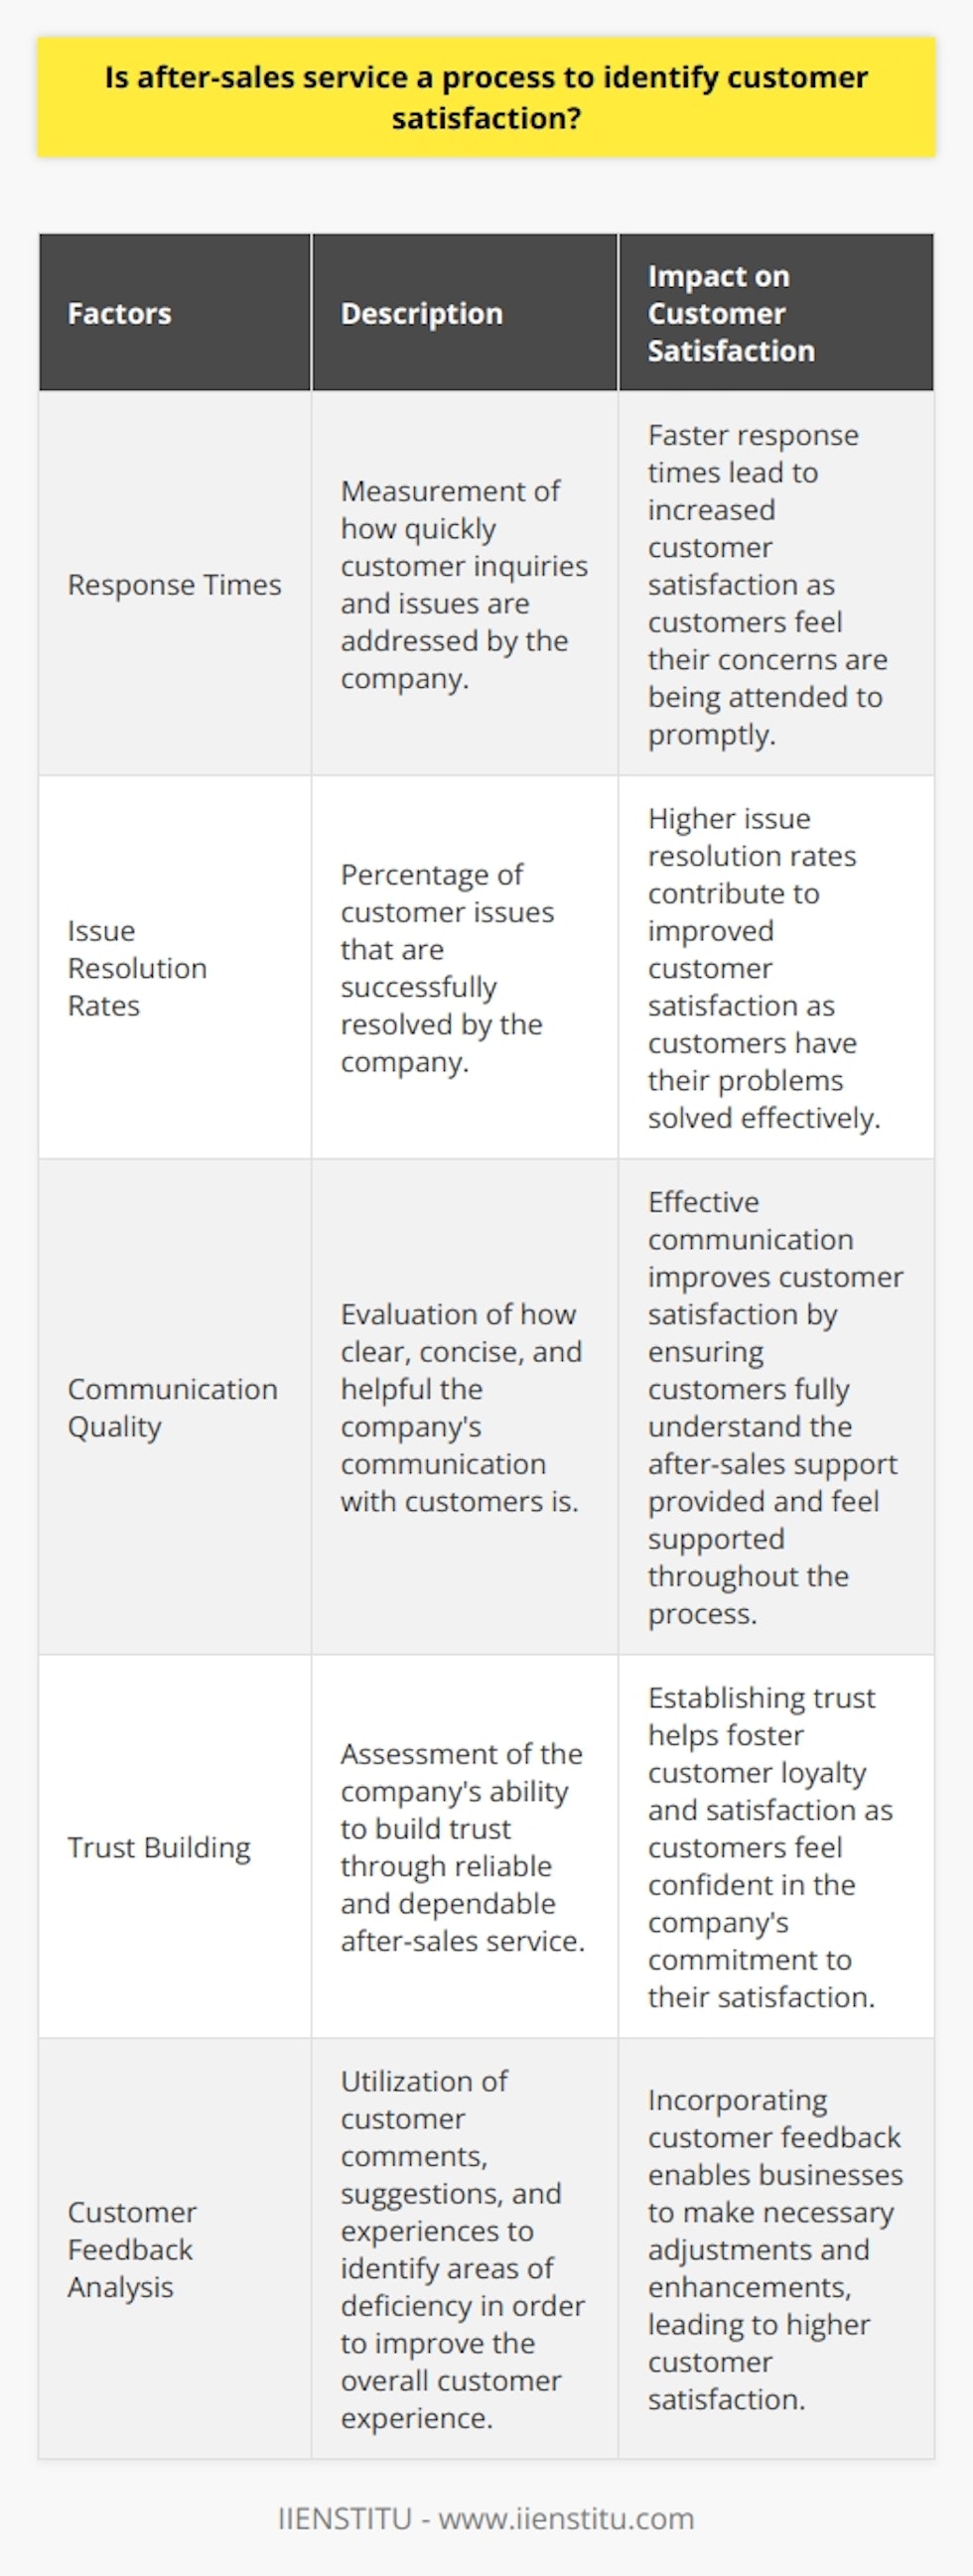 After-sales service plays a critical role in identifying and enhancing customer satisfaction. By offering support and services following a purchase, companies can ensure that customers have a positive experience with their products. Evaluating customer interactions and feedback is essential to understanding customer satisfaction. Factors such as response times, issue resolution rates, and communication quality are assessed to gain insights into areas for improvement. Effective after-sales service, characterized by clear communication and responsiveness, significantly impacts customer satisfaction. Prompt and efficient assistance builds trust and fosters loyalty. Customer feedback is a valuable resource that aids in continuous improvement. Analyzing comments, suggestions, and experiences shared by customers helps businesses identify areas of deficiency and address them accordingly, thereby enhancing the overall customer experience. In conclusion, after-sales service is a vital process for identifying customer satisfaction and improving the overall customer experience. Through constant evaluation and incorporation of feedback, businesses can better understand their customers' needs and make necessary adjustments to achieve higher satisfaction rates.